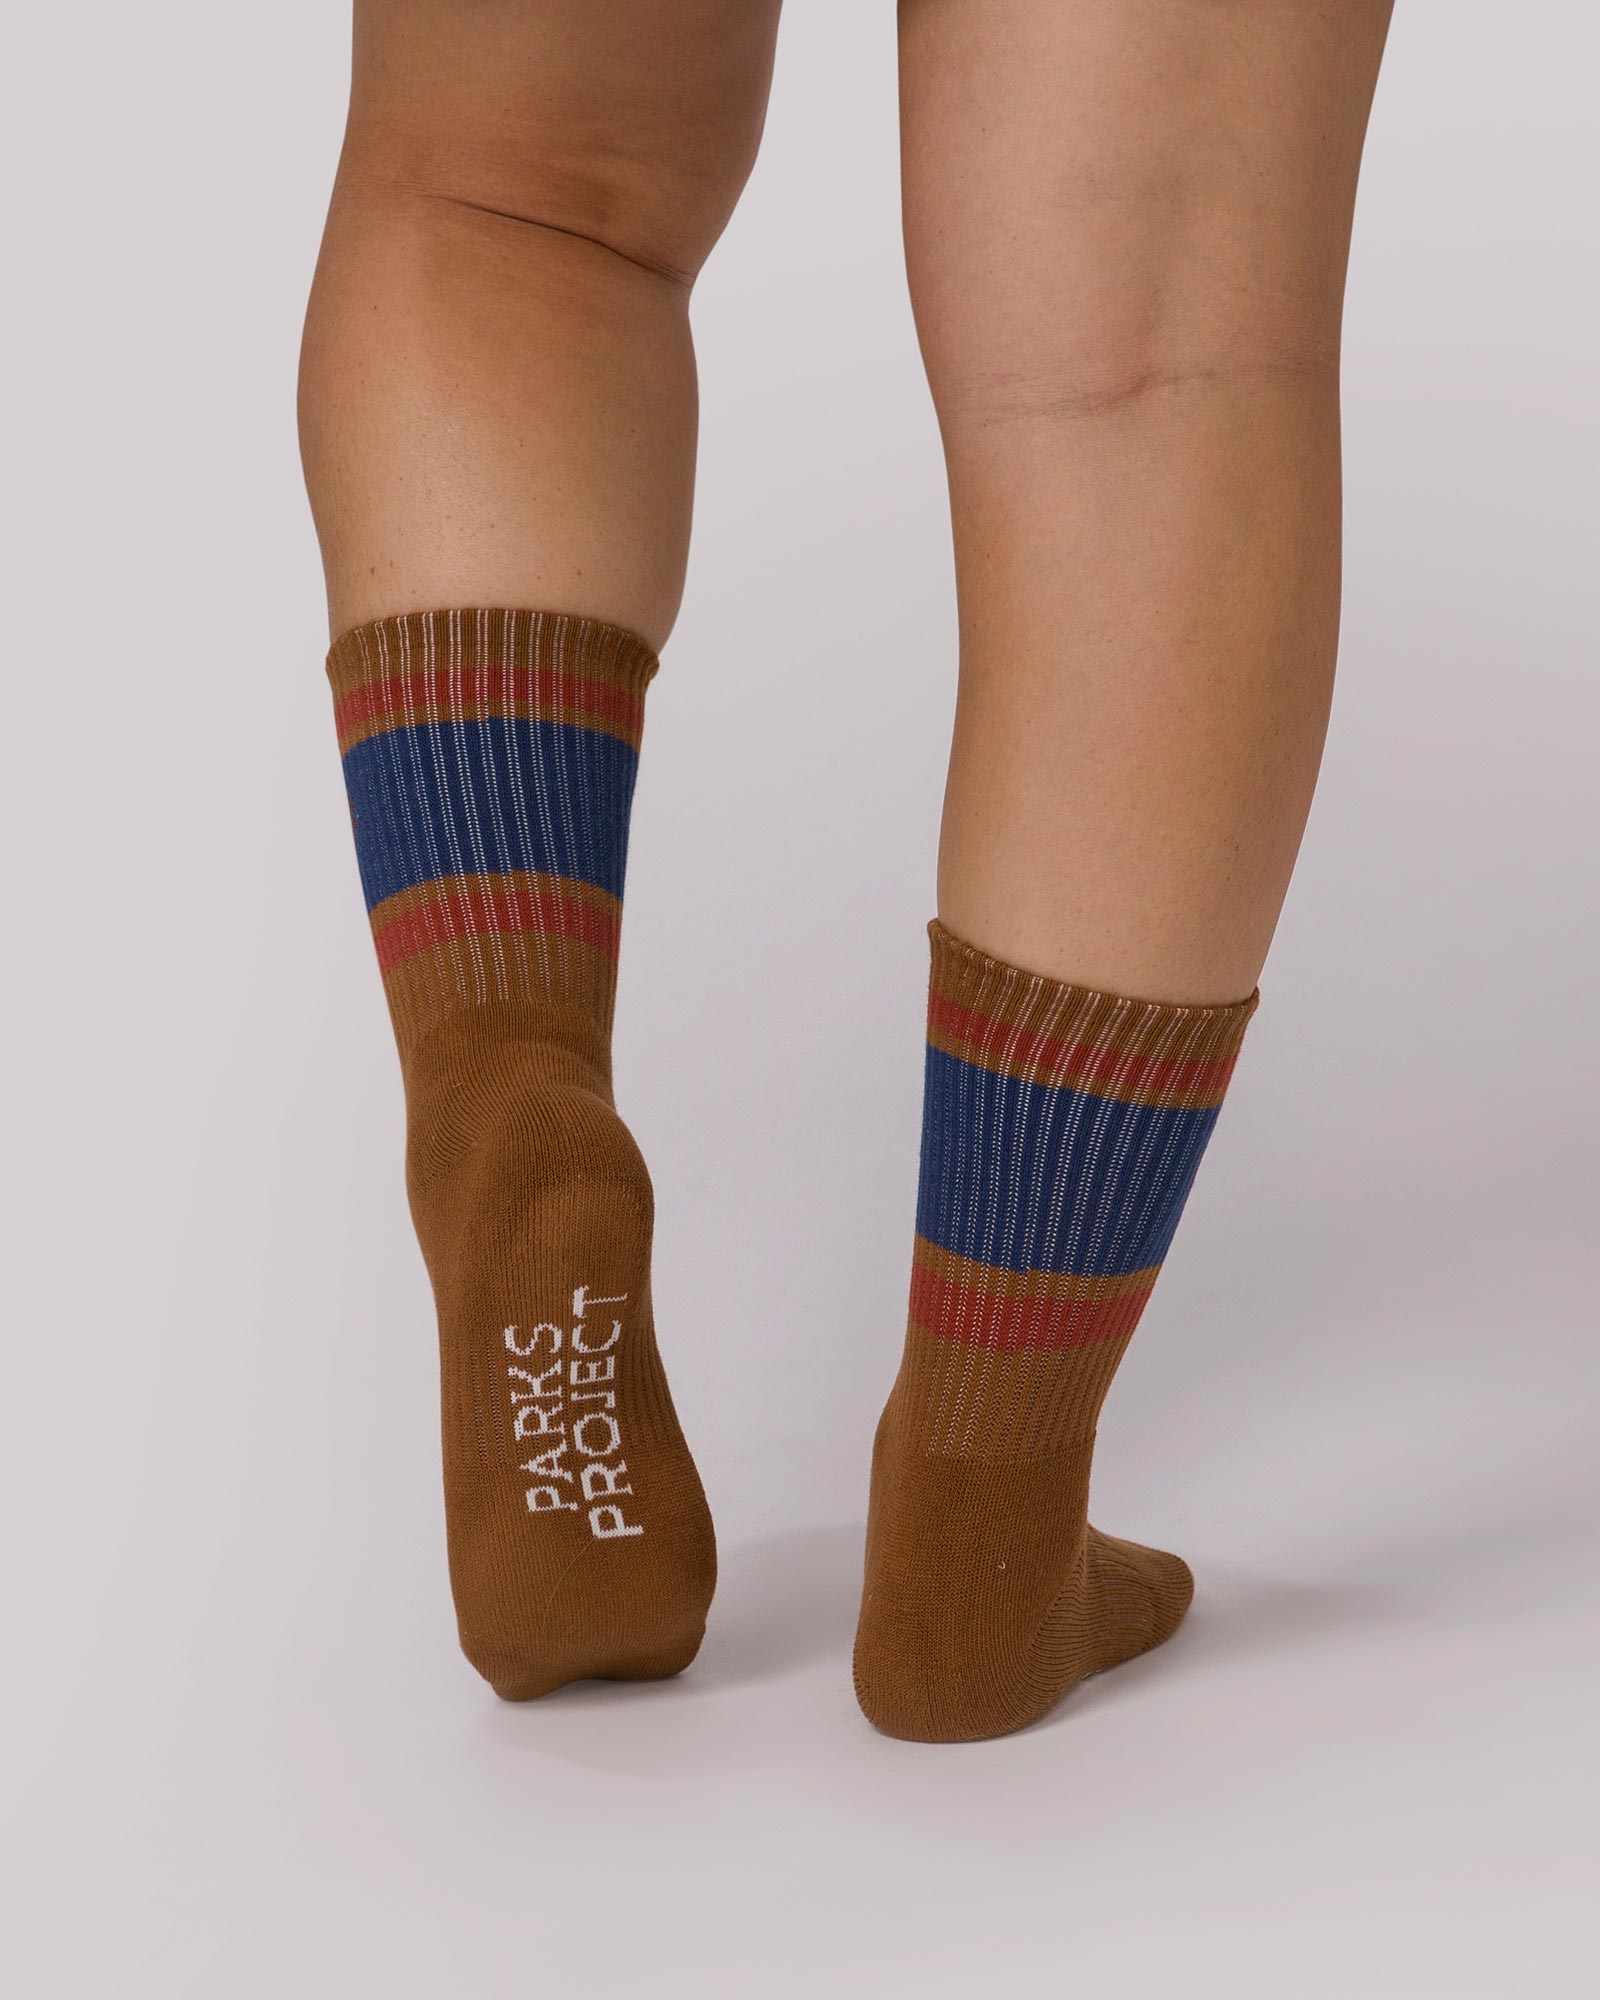 Knock It Out of the Park Socks – Ryland Strong Foundation